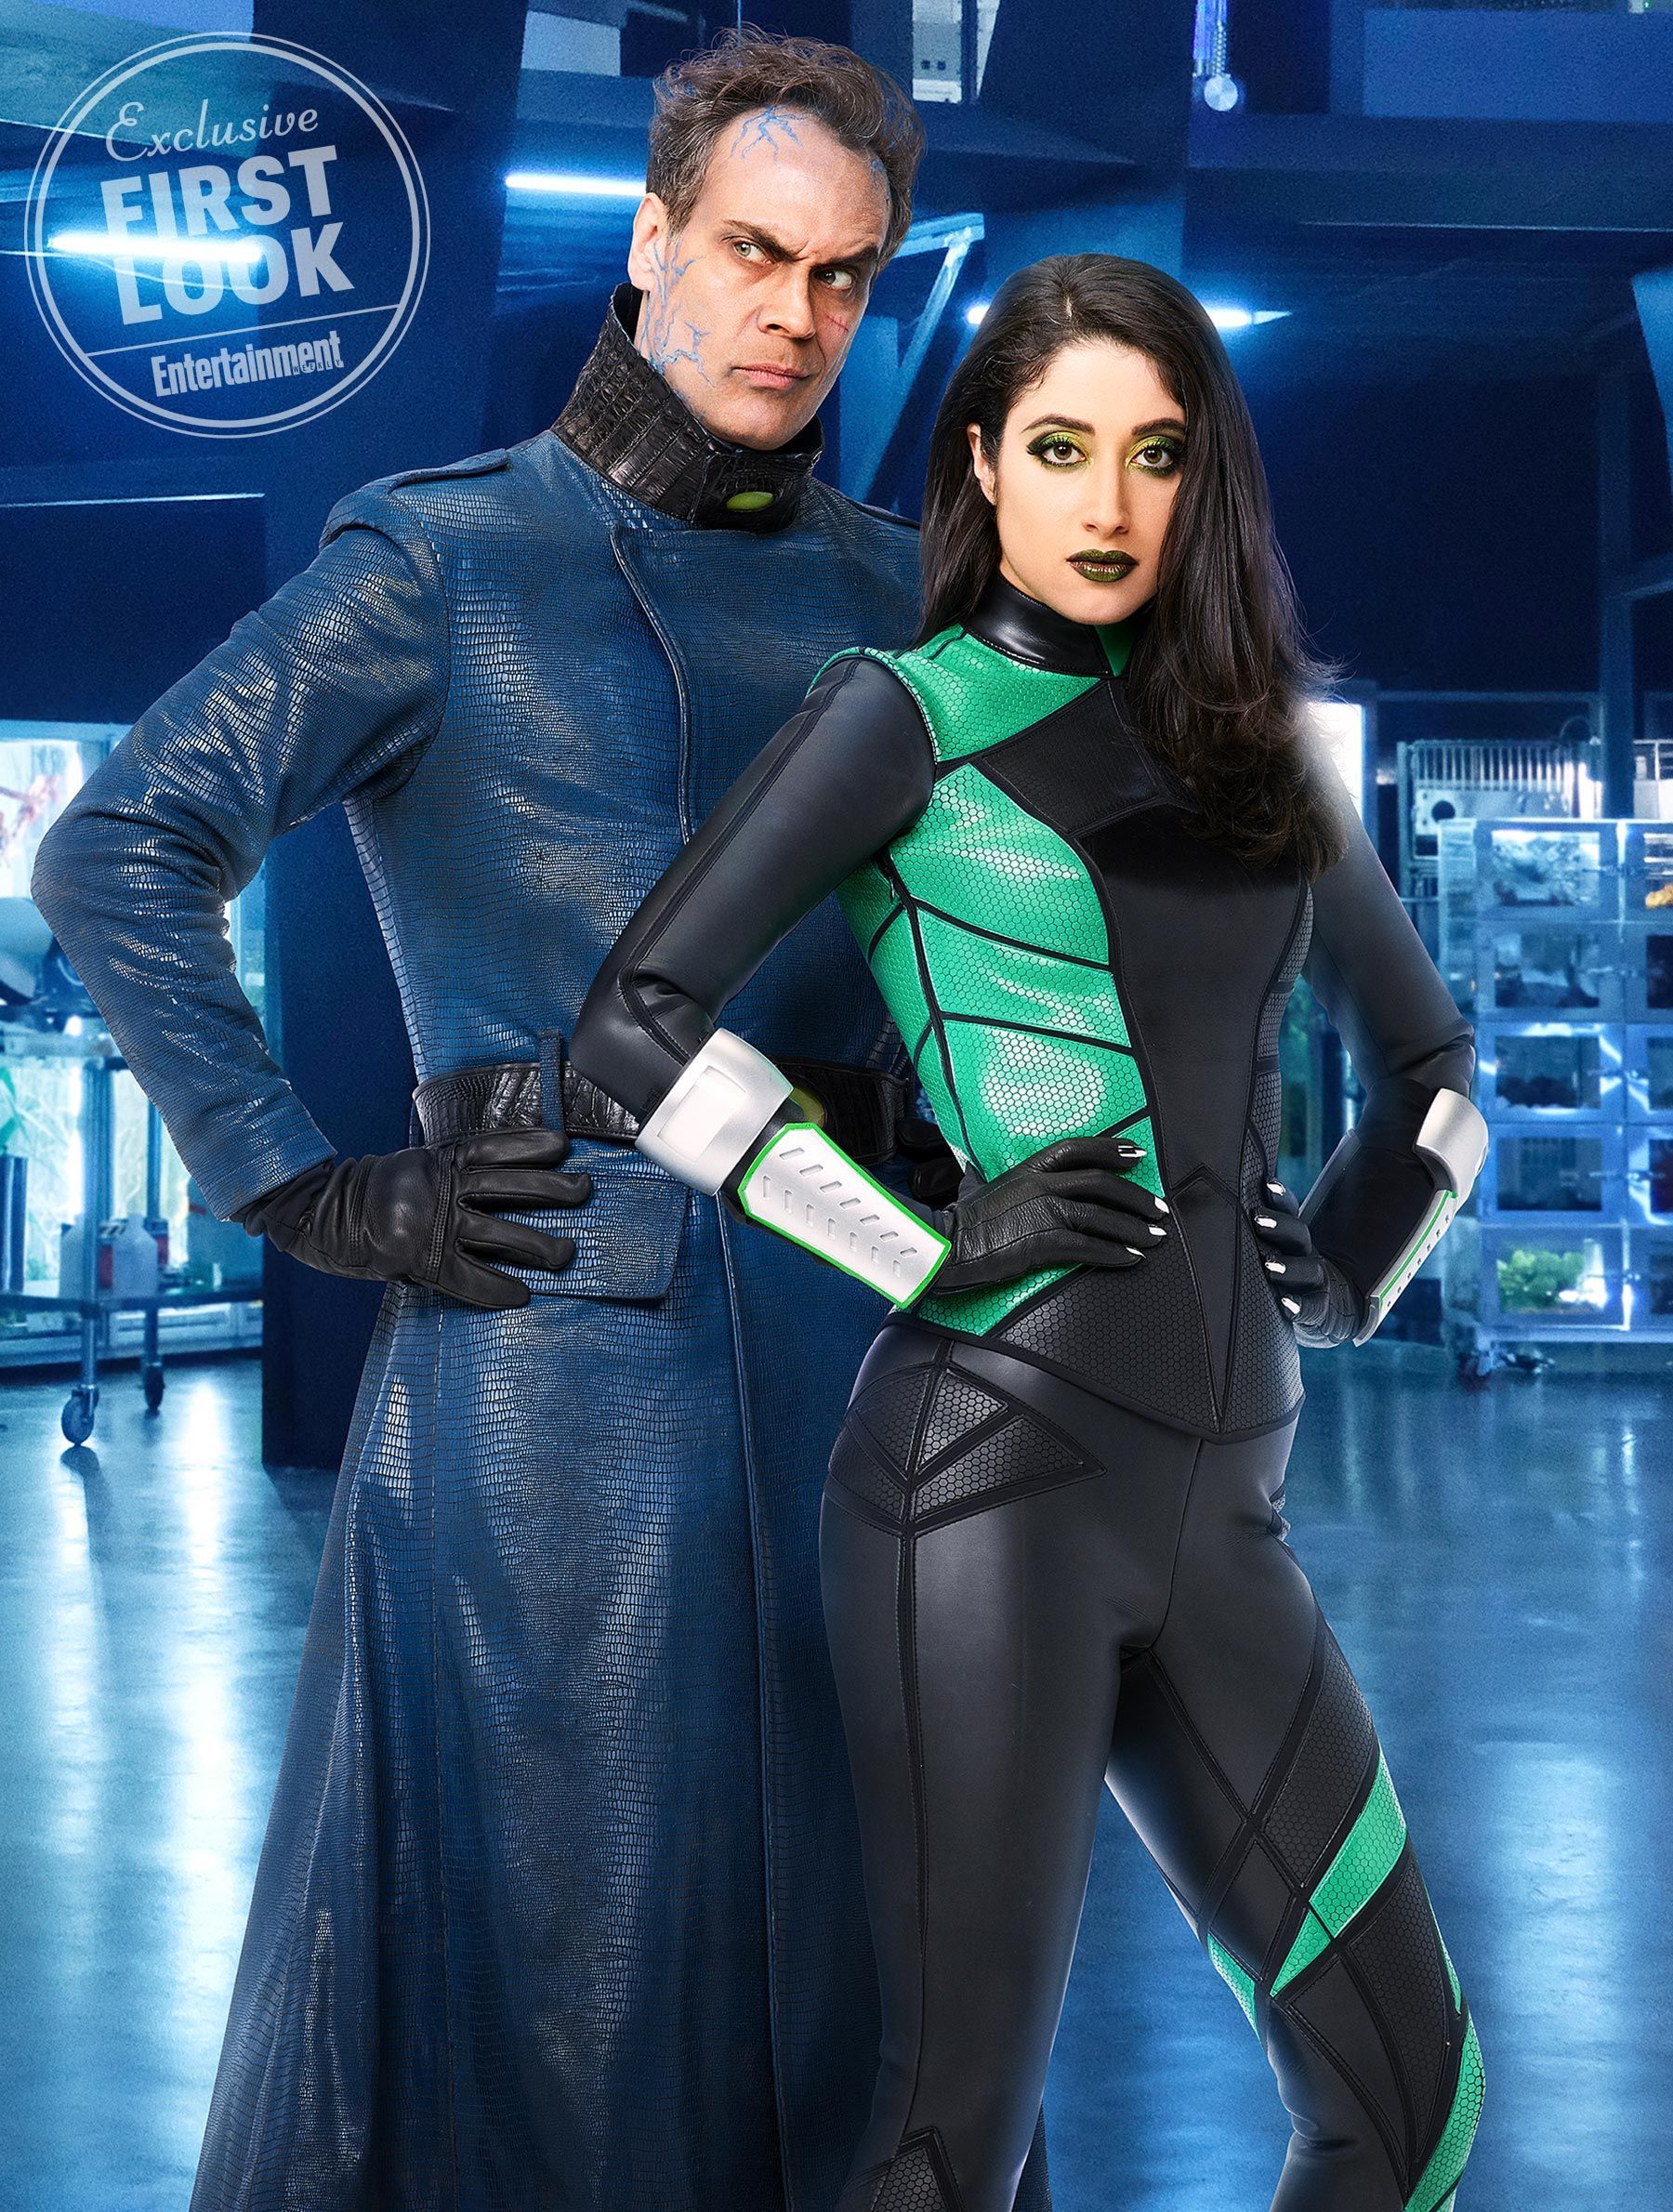 See What Dr. Drakken And Shego Look Like In Disney's Live Action